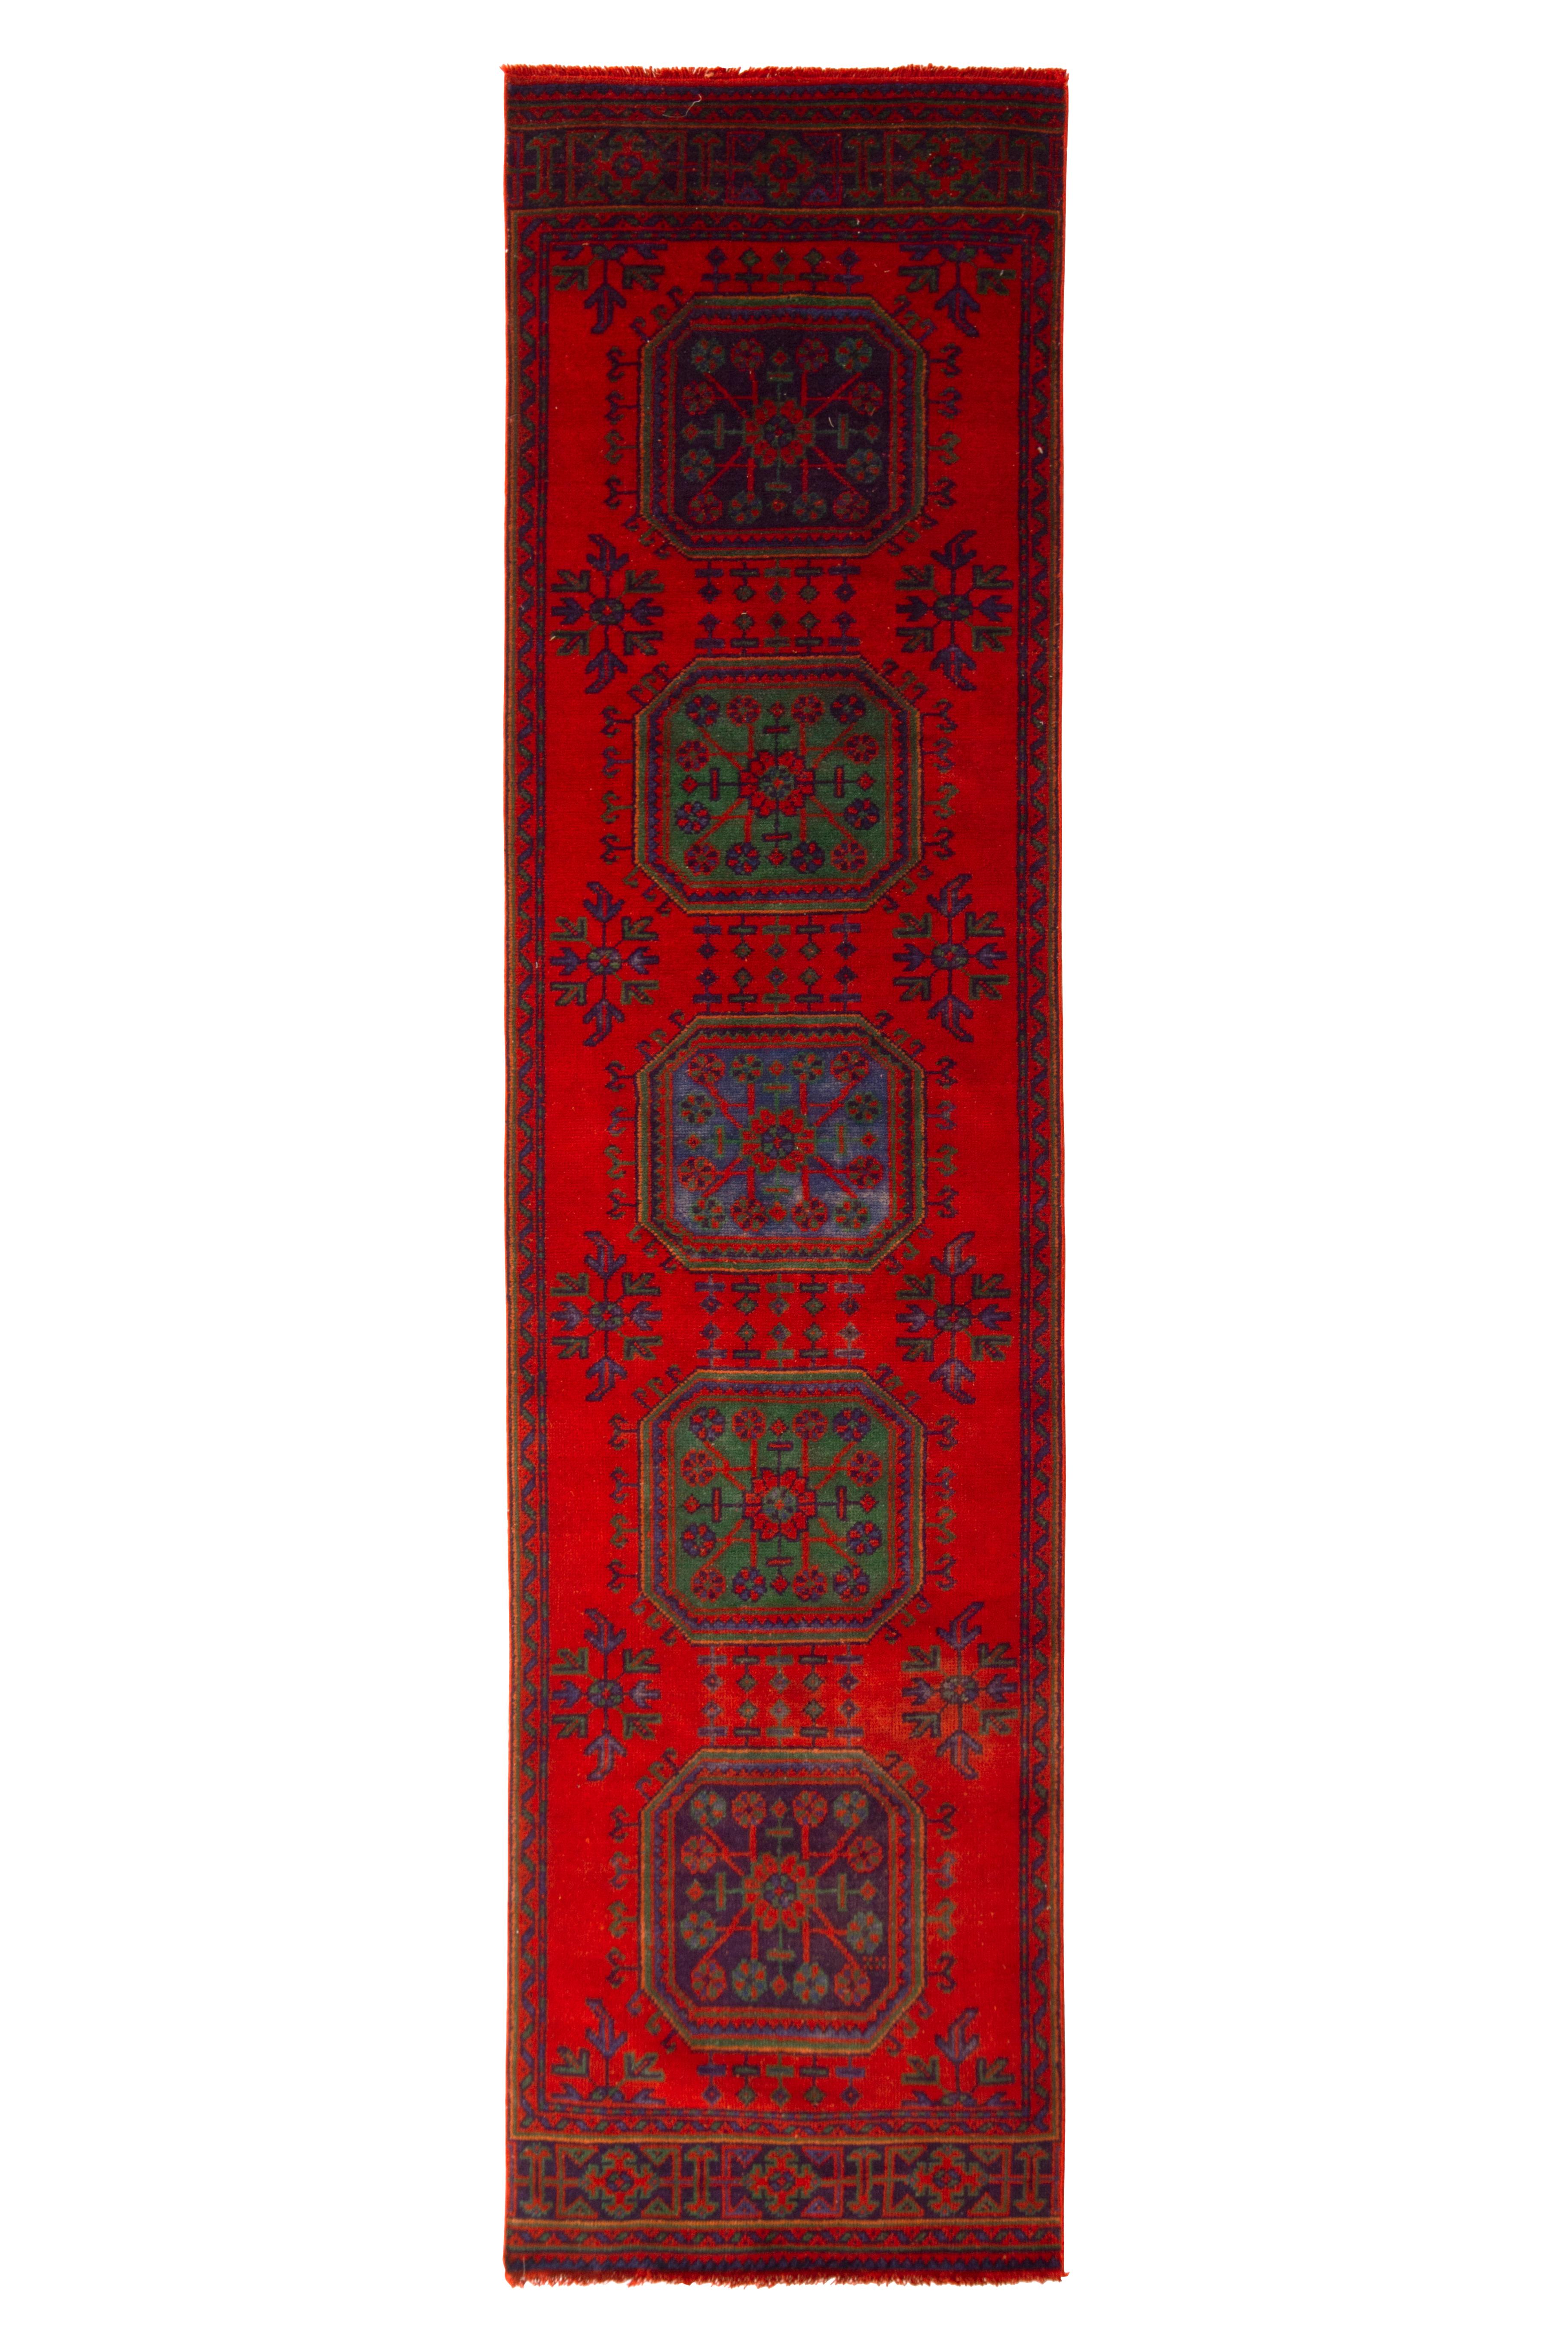 Hand knotted in wool from Turkey circa 1950-1960, this vintage mid-century Oushak runner employs a striking crimson red colorway, naturally juxtaposed with luminous green and blue hues bringing out a defined geometric floral emphasis in both the